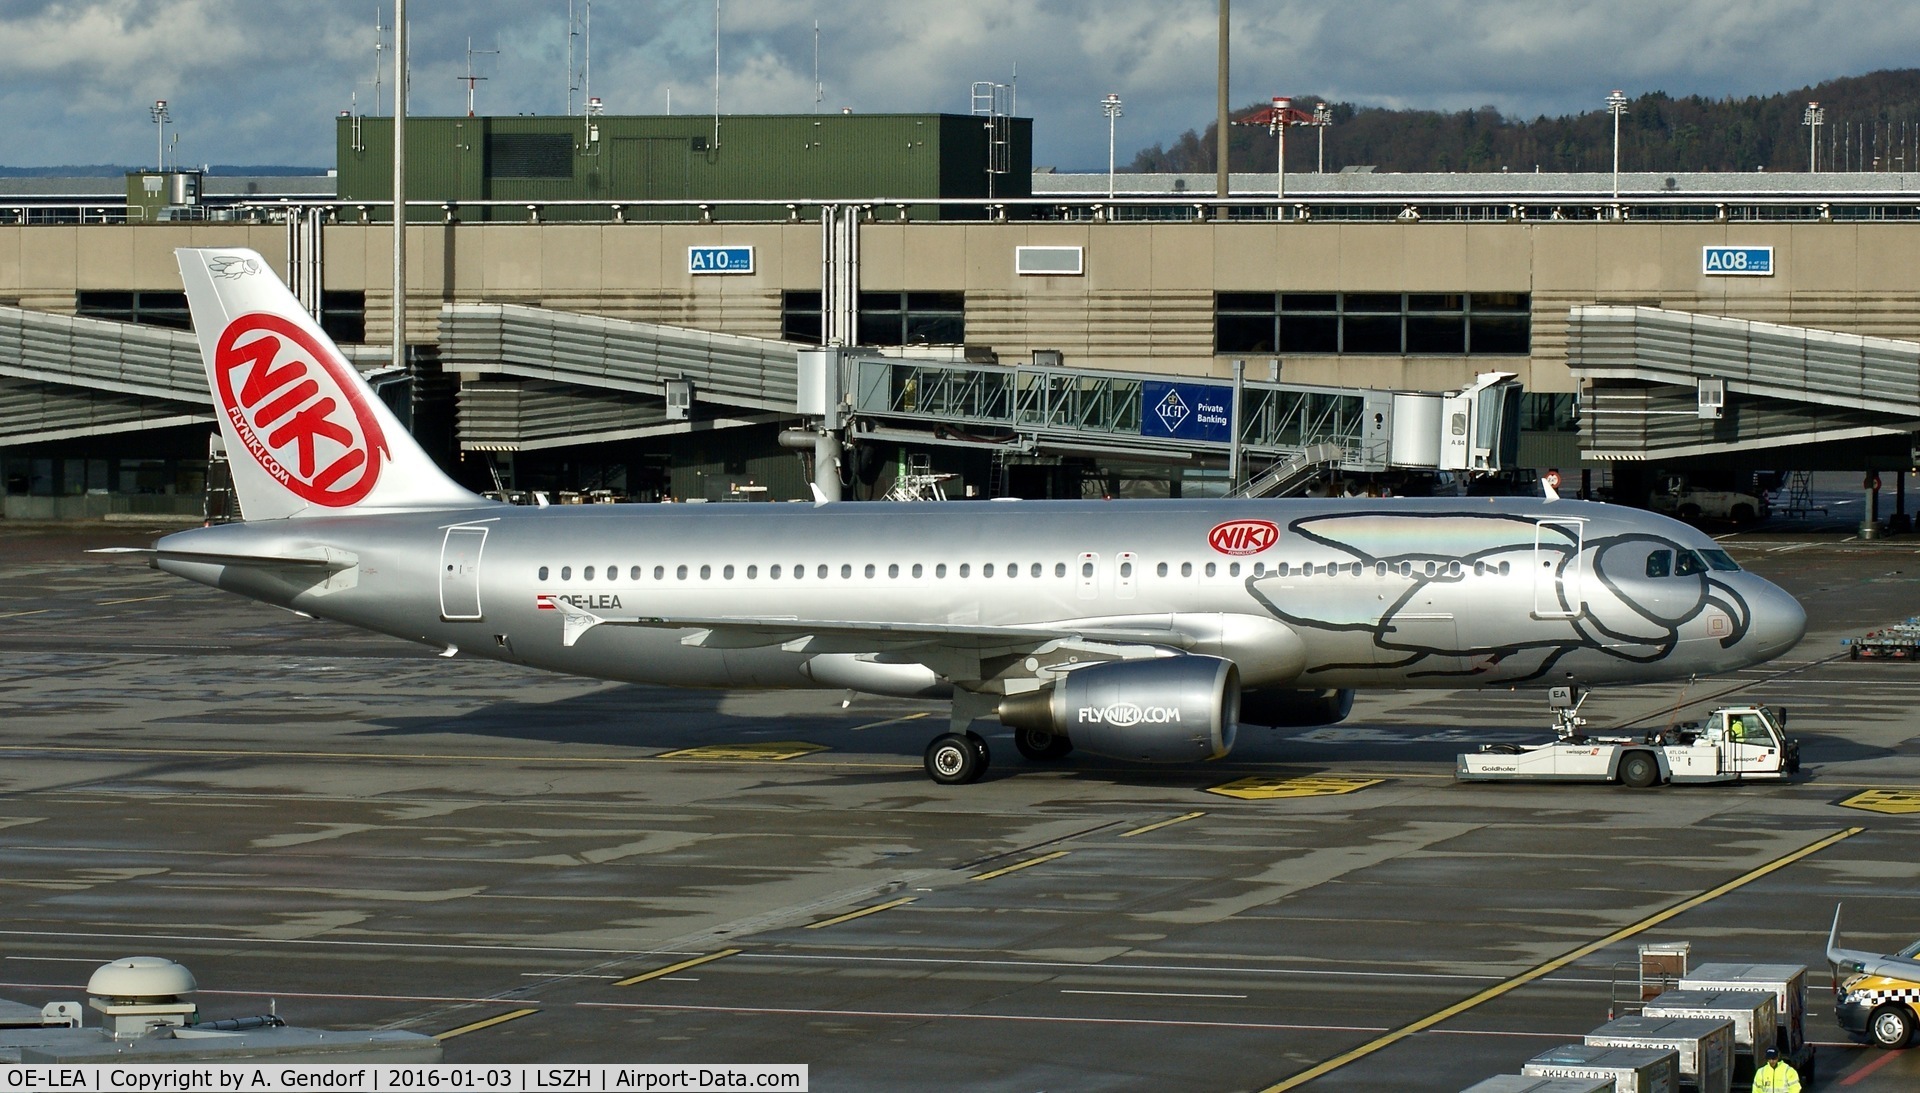 OE-LEA, 2005 Airbus A320-214 C/N 2529, Niki, seen here during pushback at Zürich-Kloten(LSZH)